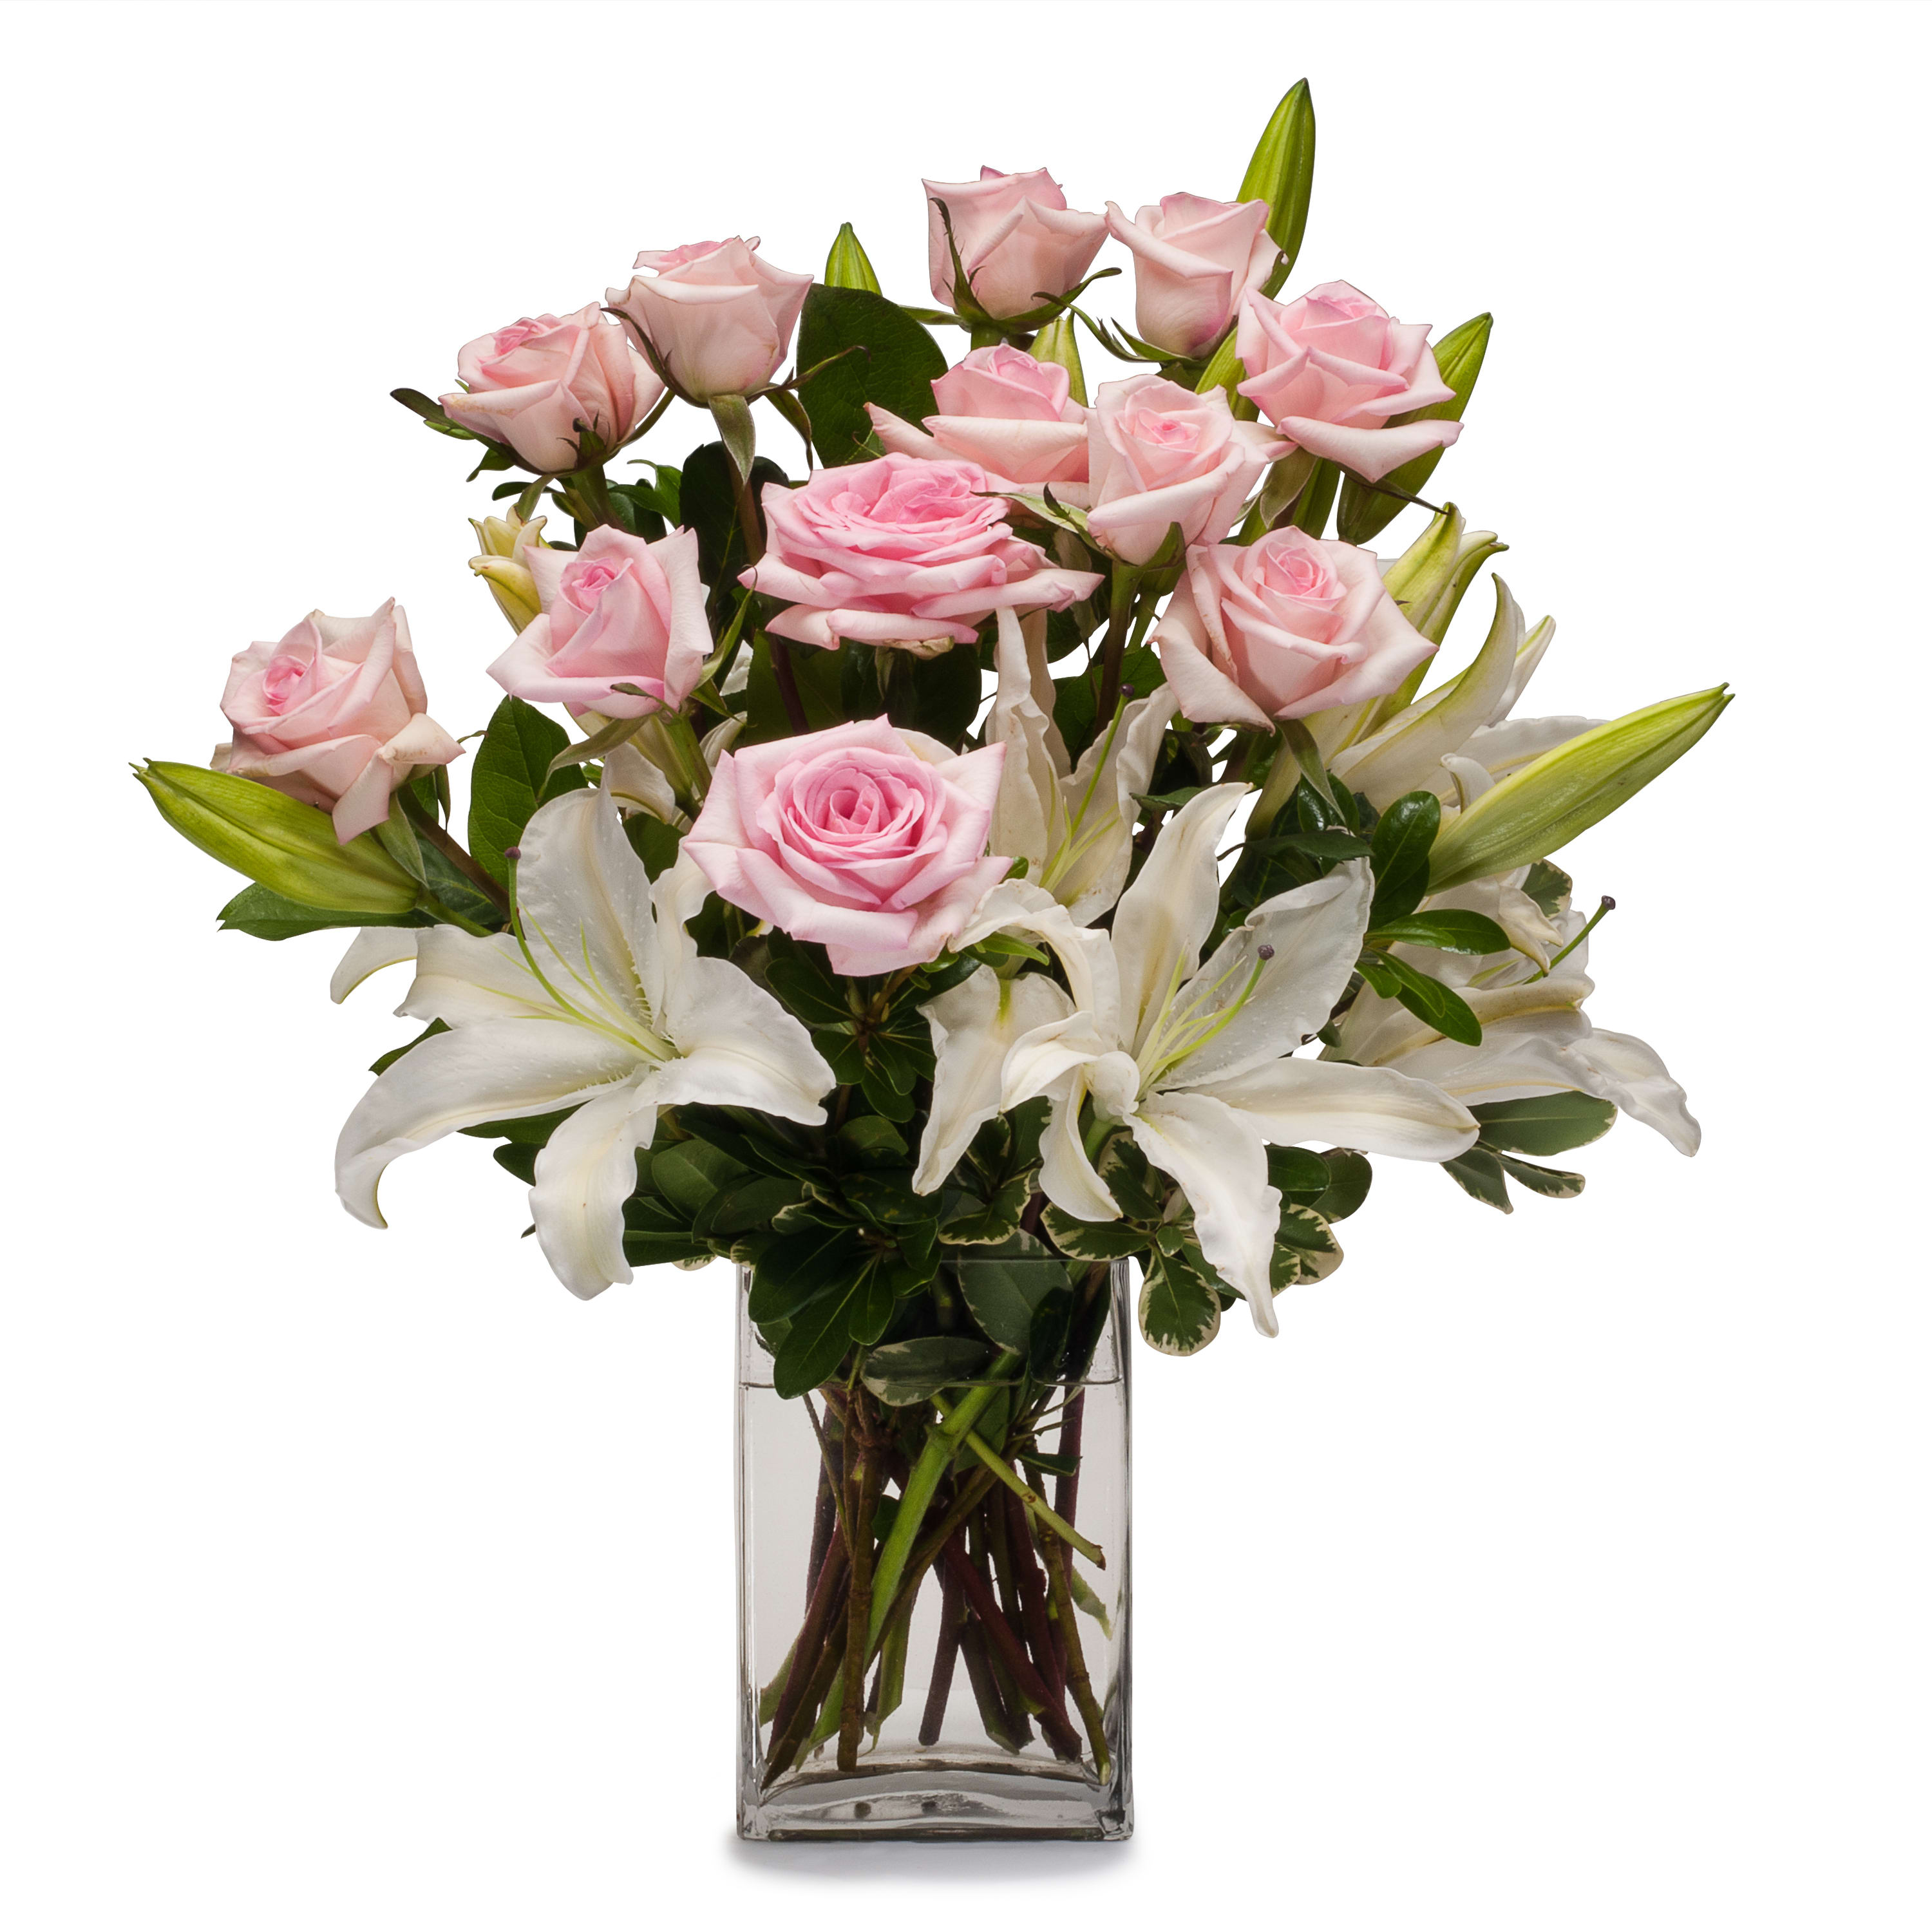 Kisses TMF13-223 - This gorgeous arrangement of white lilies and pink roses is a great choice to celebrate pure joy or pure love.